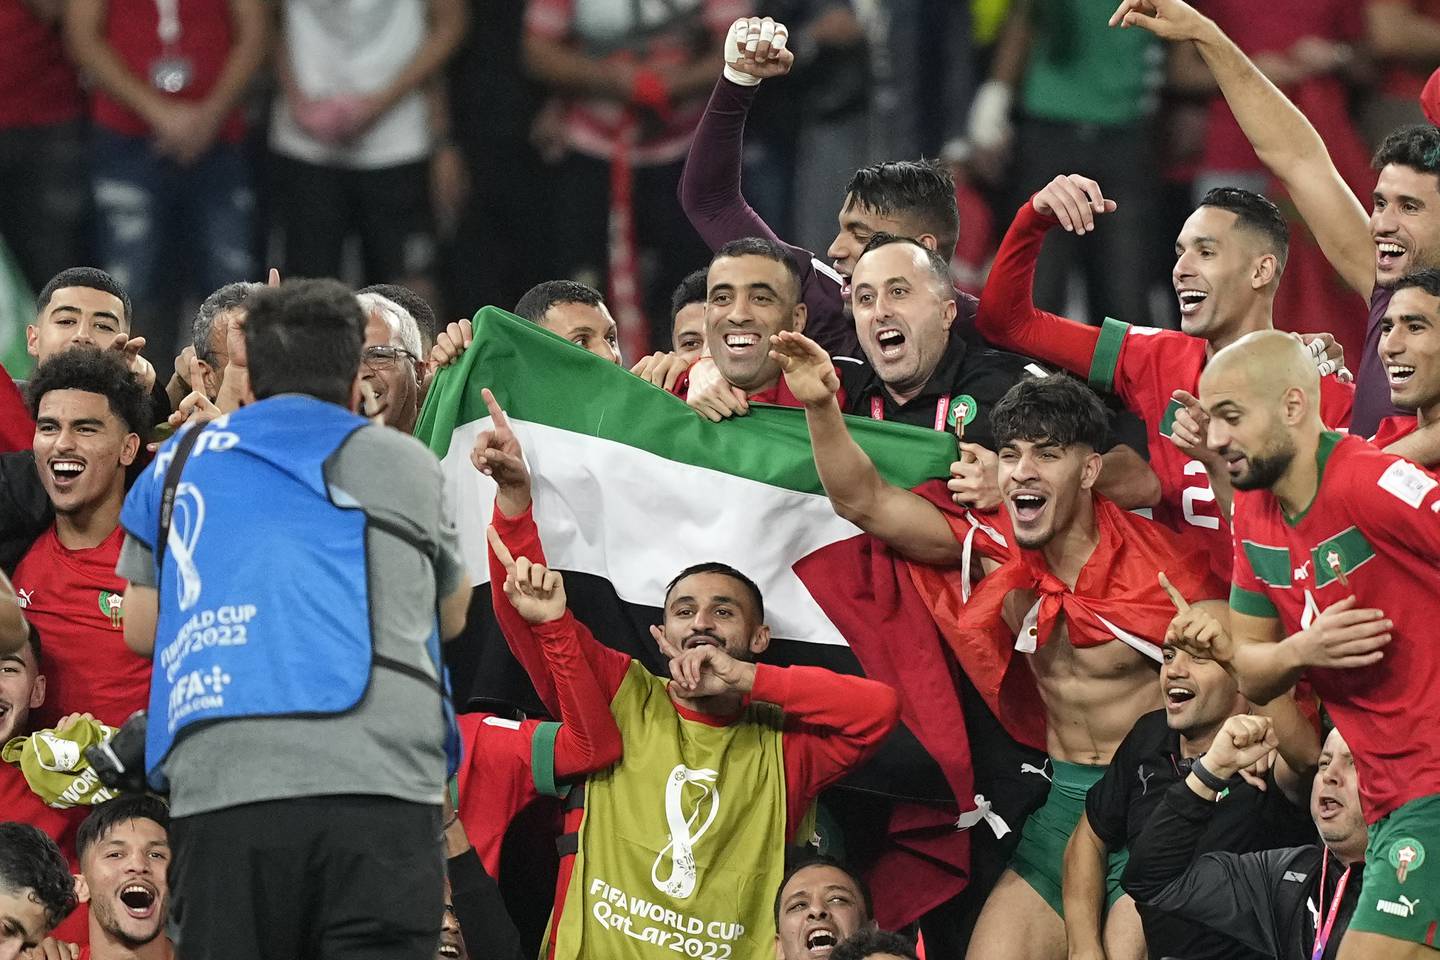 Morocco's players with the Palestinian flag after beating Spain. AP